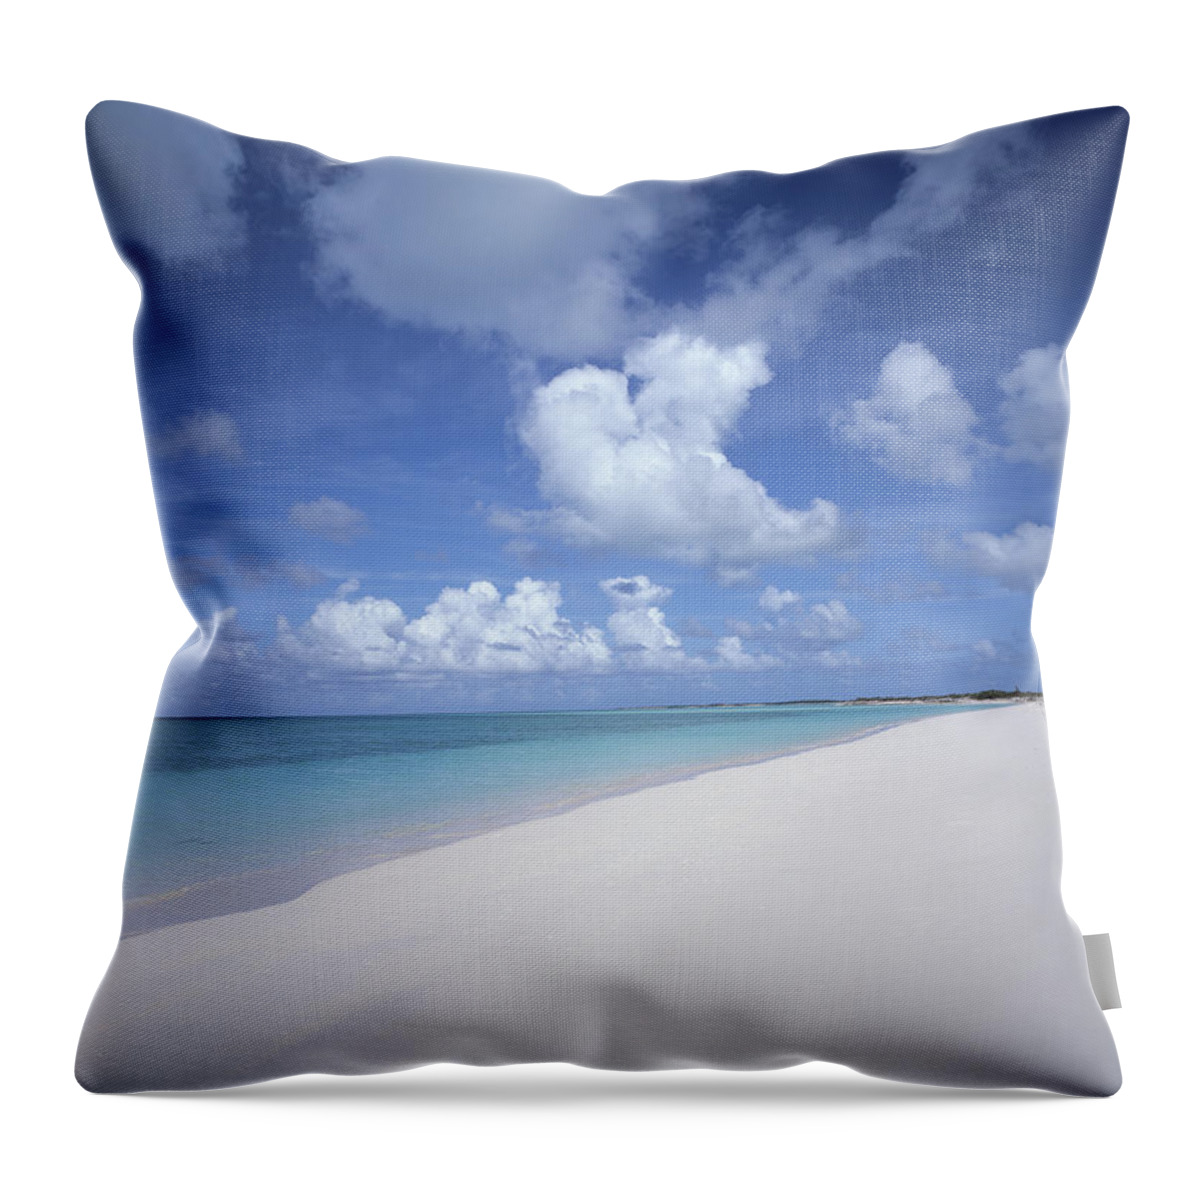 Scenics Throw Pillow featuring the photograph Bahamas, Turks And Caicos Islands by Bob Thomas